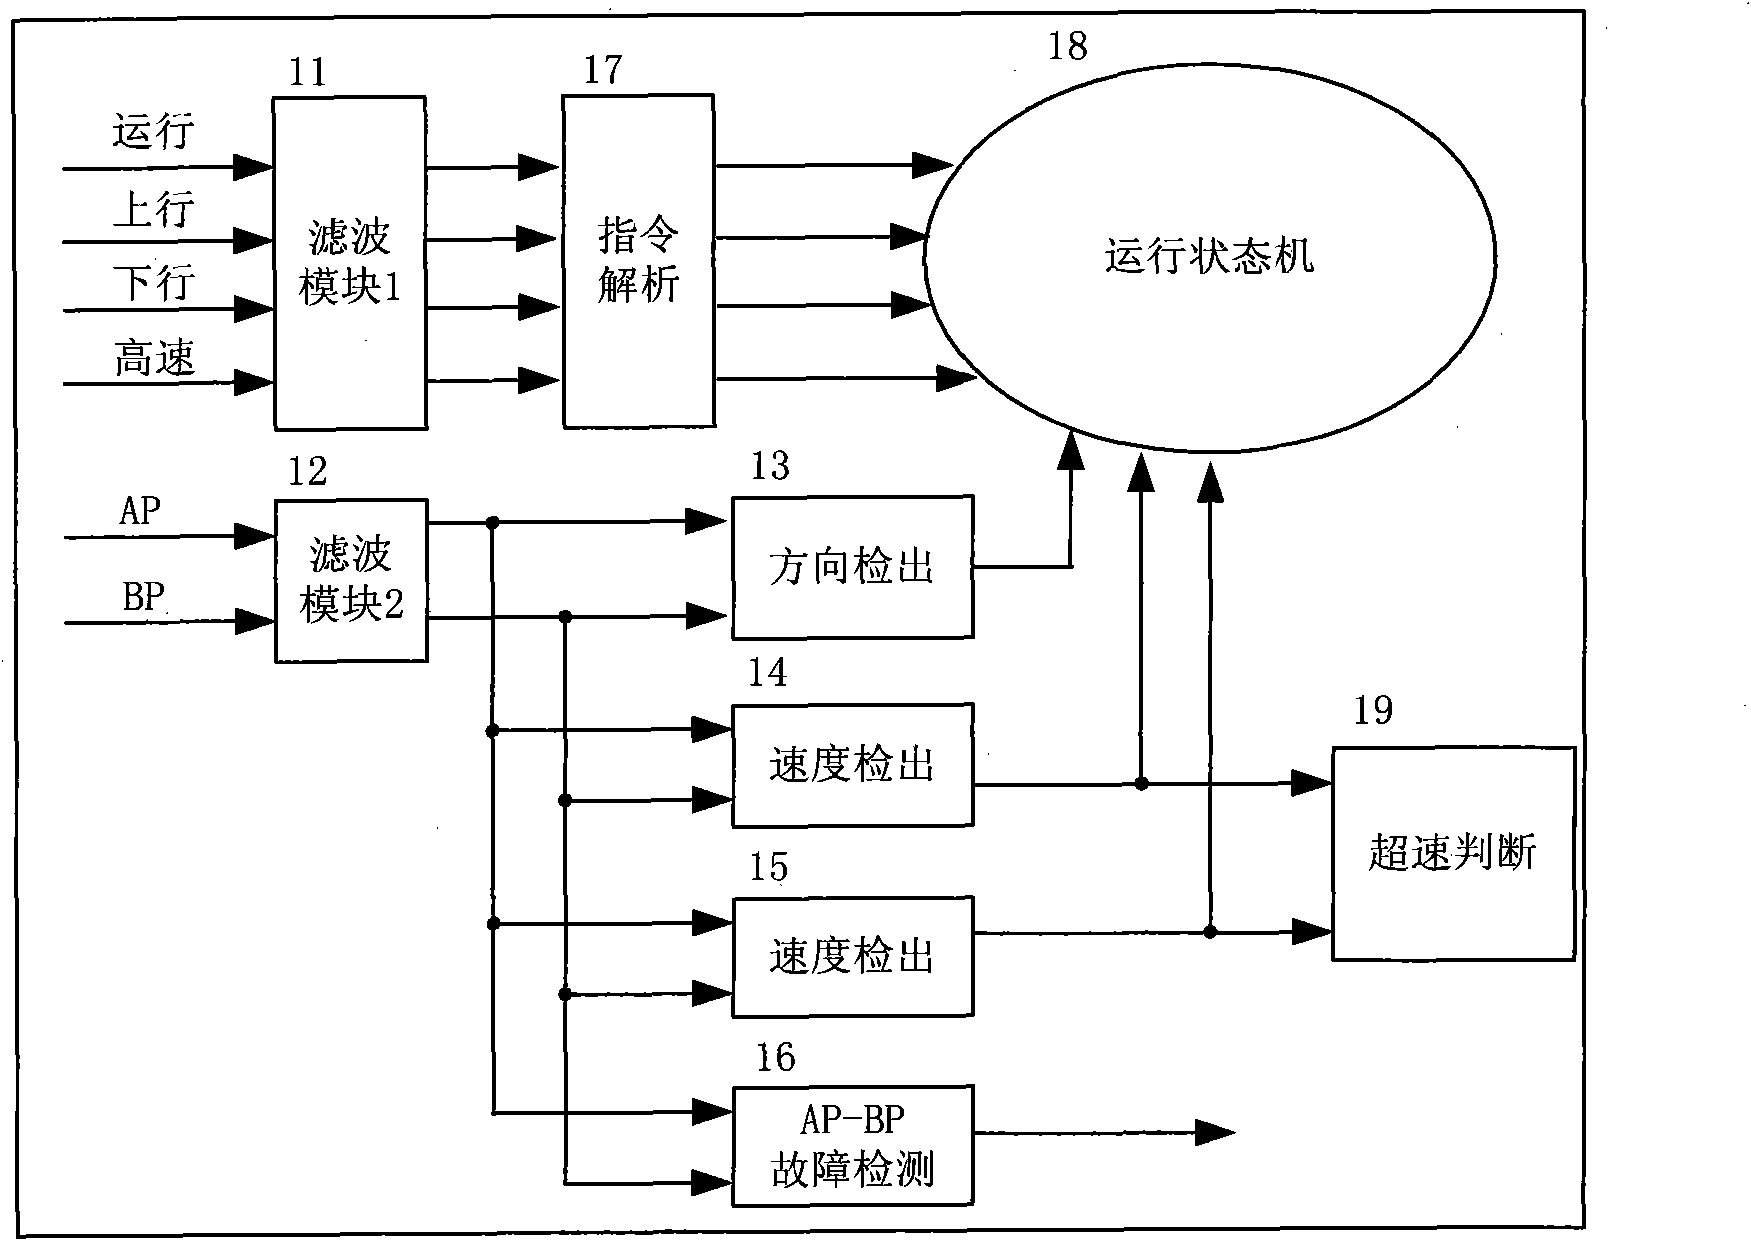 Reverse, over-speed and stall protection safety circuit of escalator and moving walkway